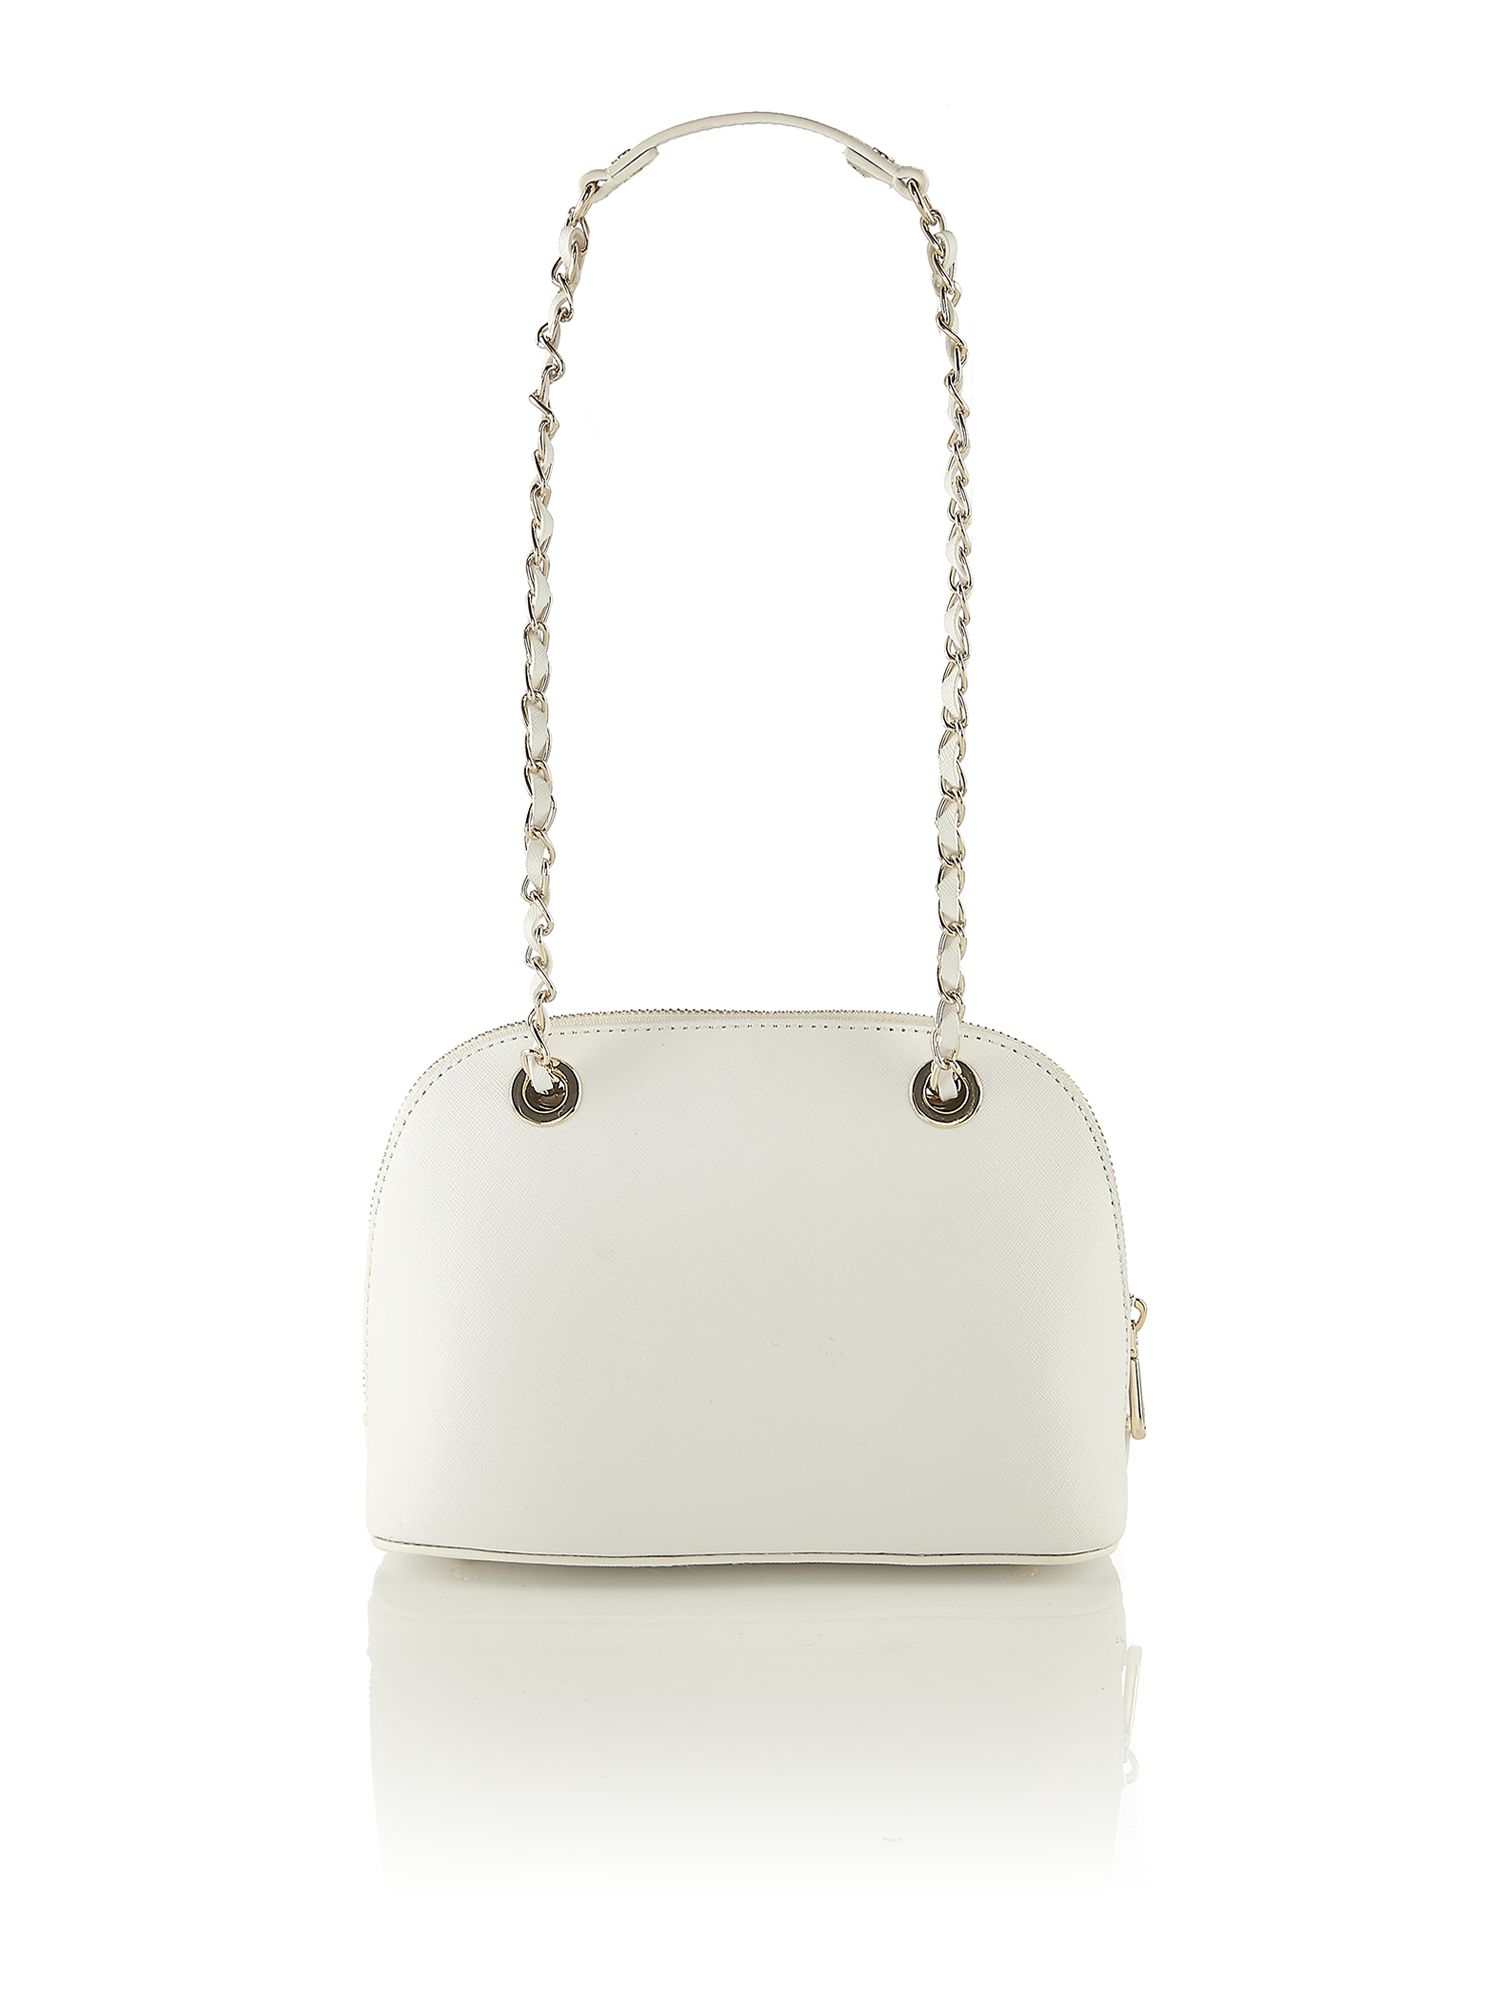 Dkny Saffiano White Small Rounded Cross Body Bag in White | Lyst